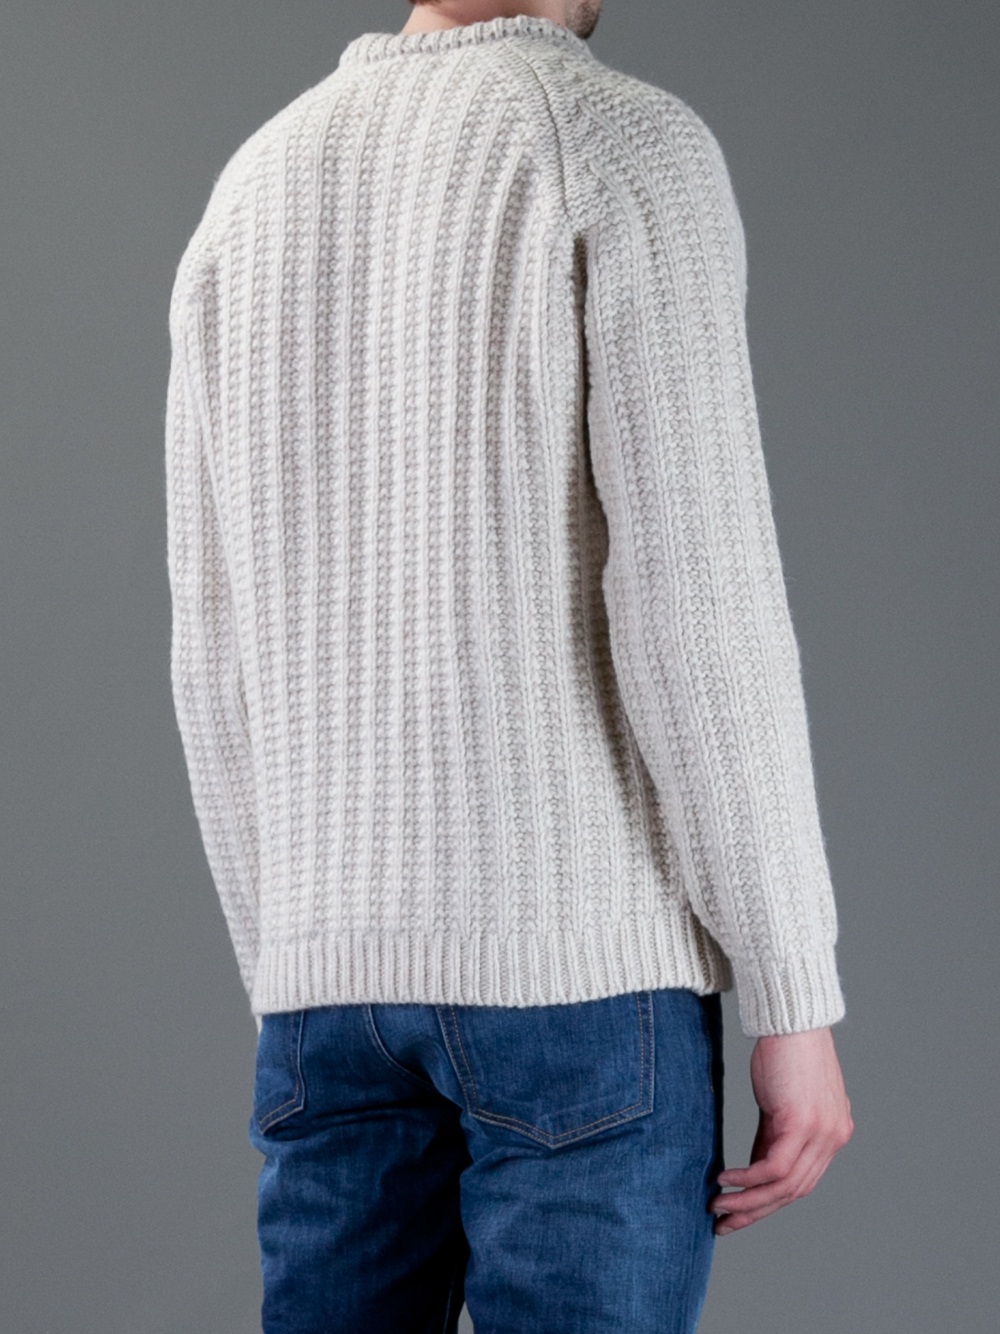 Lyst - Our Legacy Heavy Knit Sweater in Natural for Men